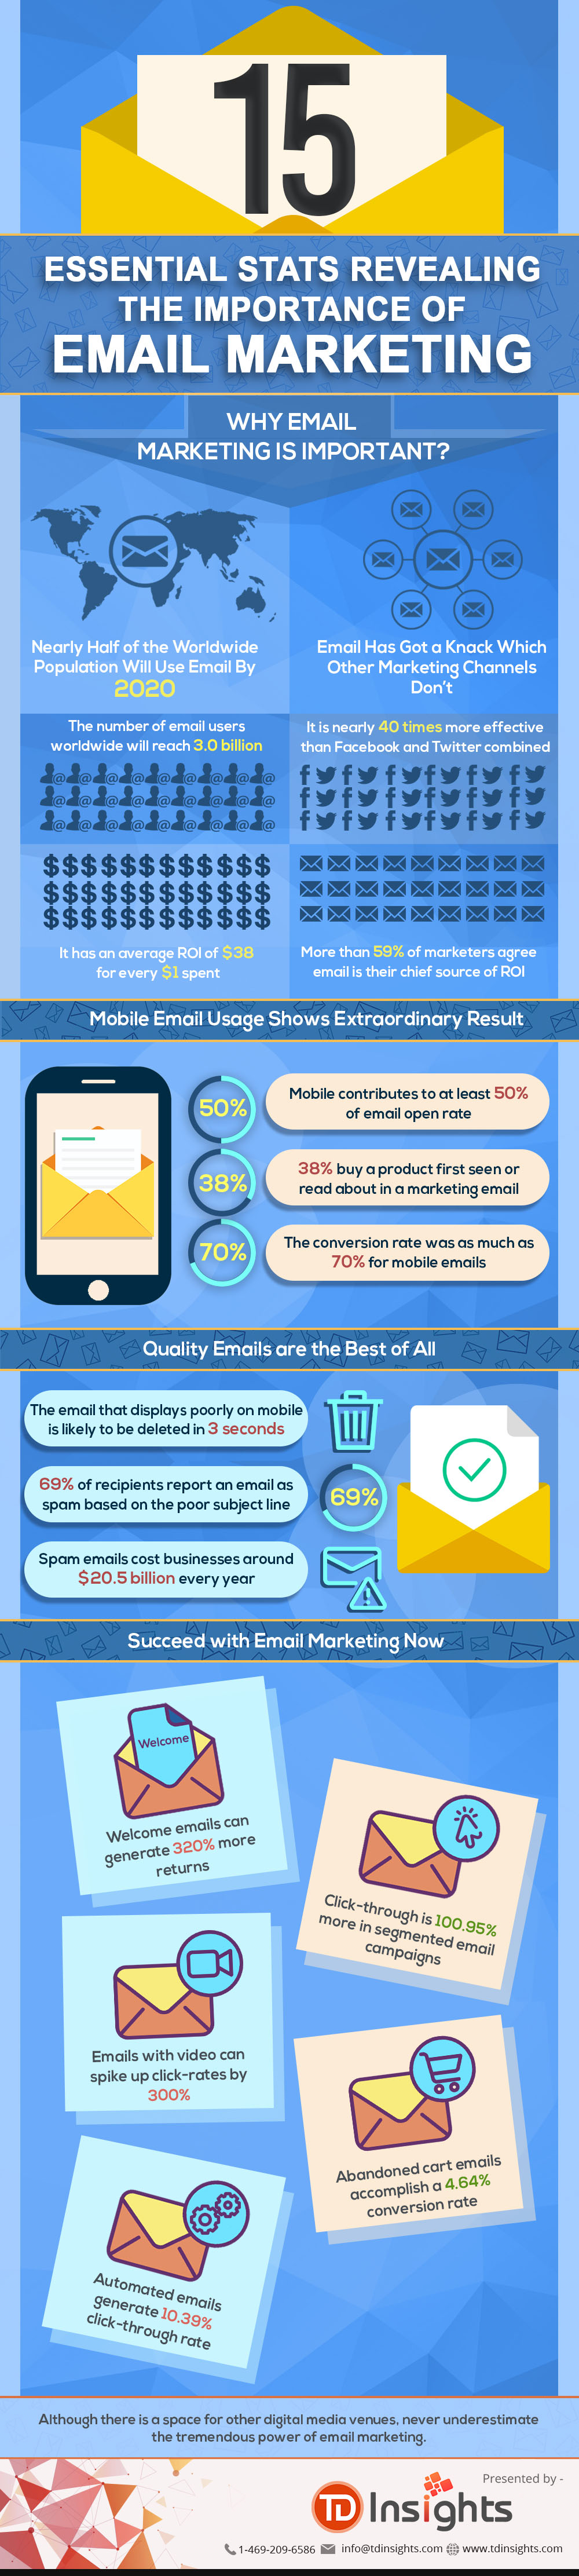 15 Essential Stats Revealing the Importance of Email Marketing